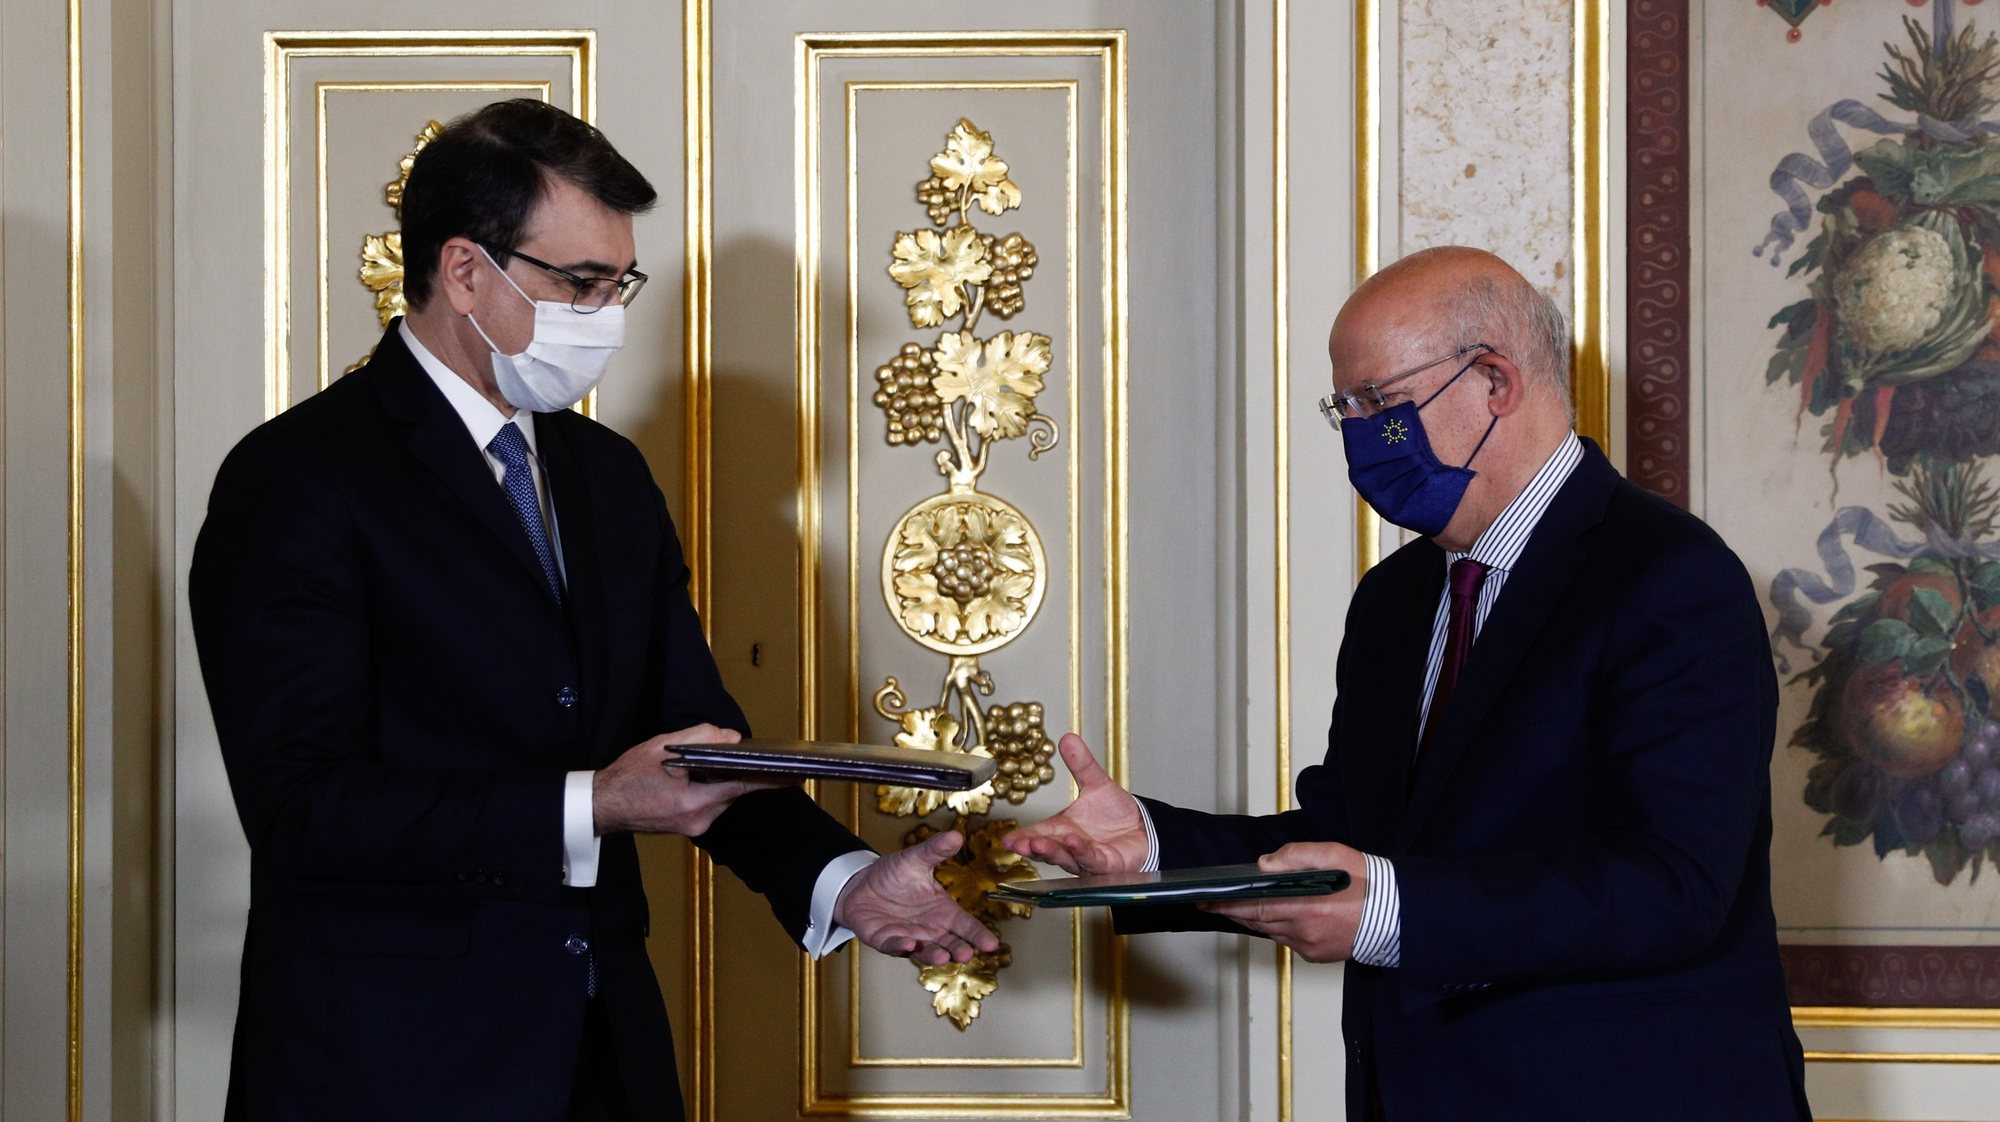 Portuguese Minister of State for Foreign Affairs Augusto Santos Silva (R) and his Brazilian counterpart Carlos Franco Franca (L) after signing agreements during their meeting at the Necessidades Palace in Lisbon, Portugal, 02 July 2021.  ANTONIO COTRIM/LUSA